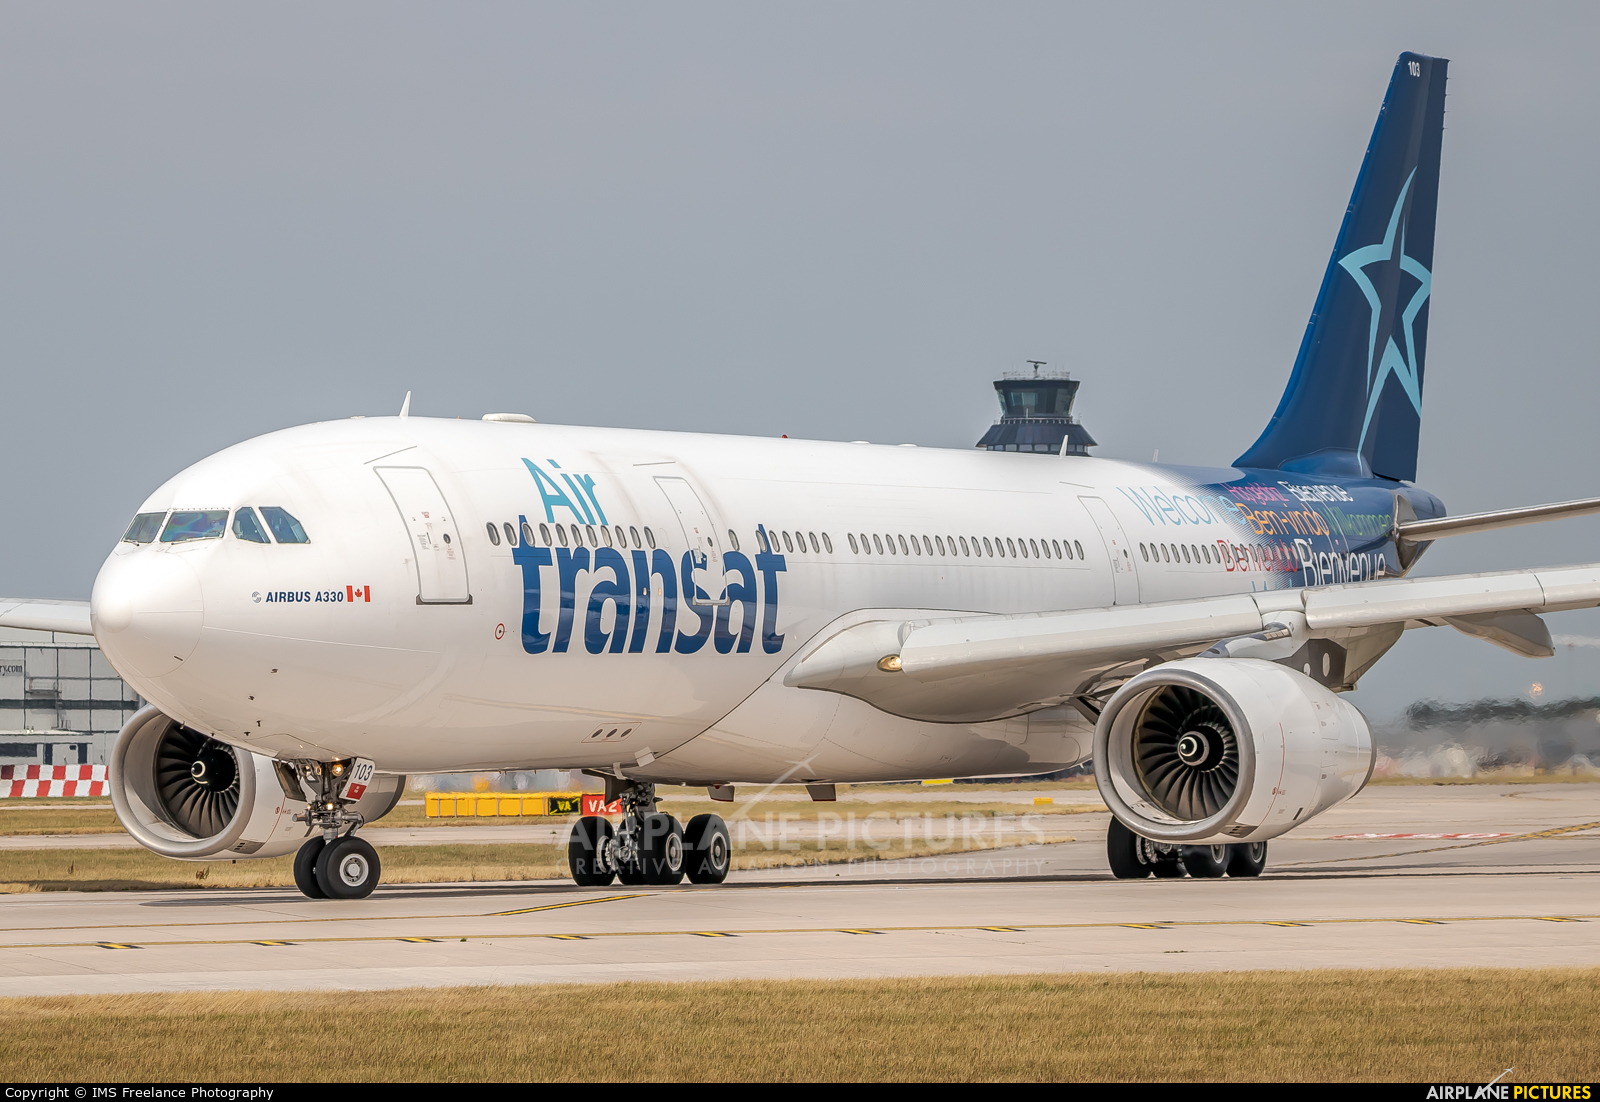 C Gpts Air Transat Airbus A330 200 At Manchester Photo Id 1098323